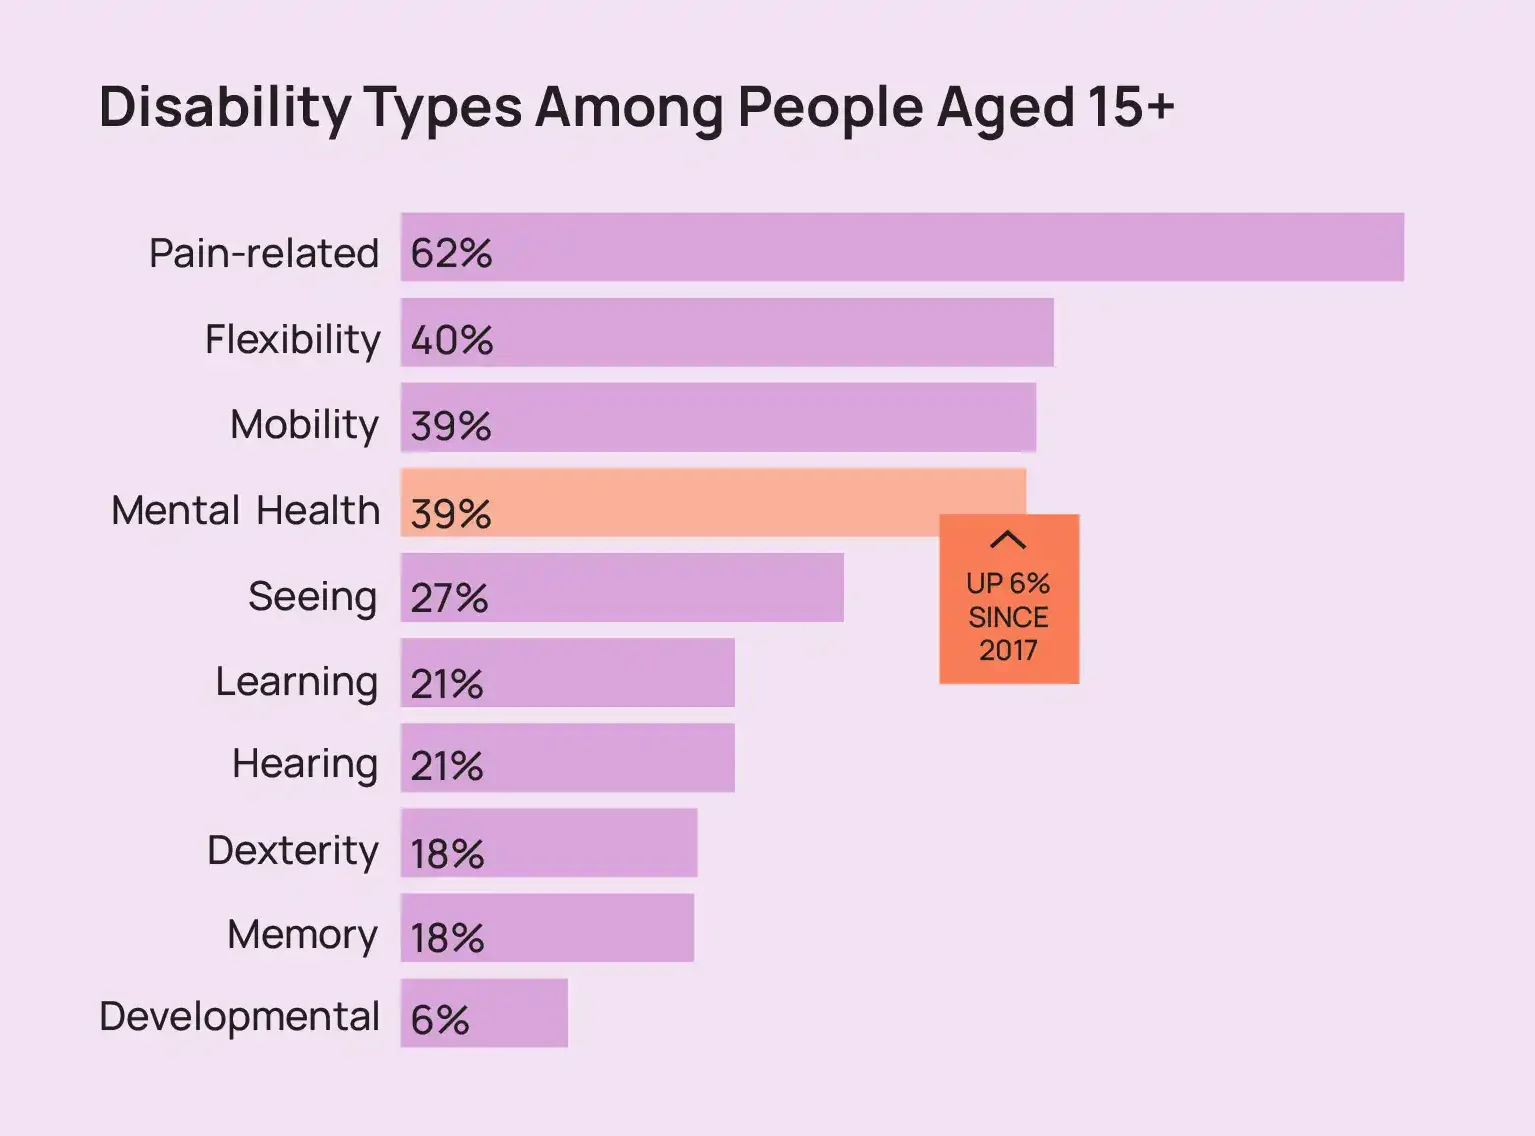 A graph showing disability types among people aged 15 and up.